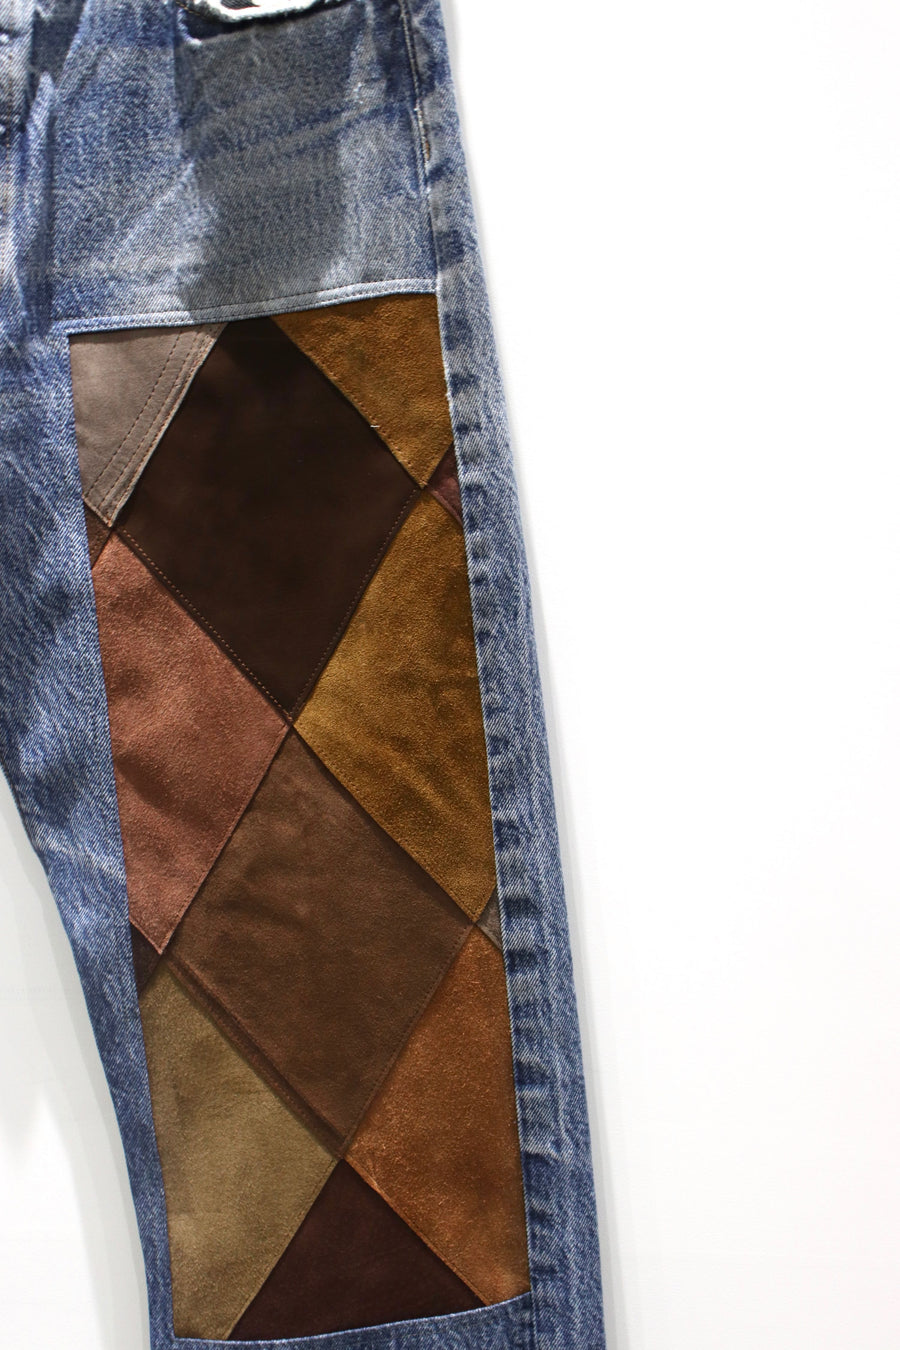 Children of the discordance  NY LEATHER PATCHWORK DENIM-2(BROWN)